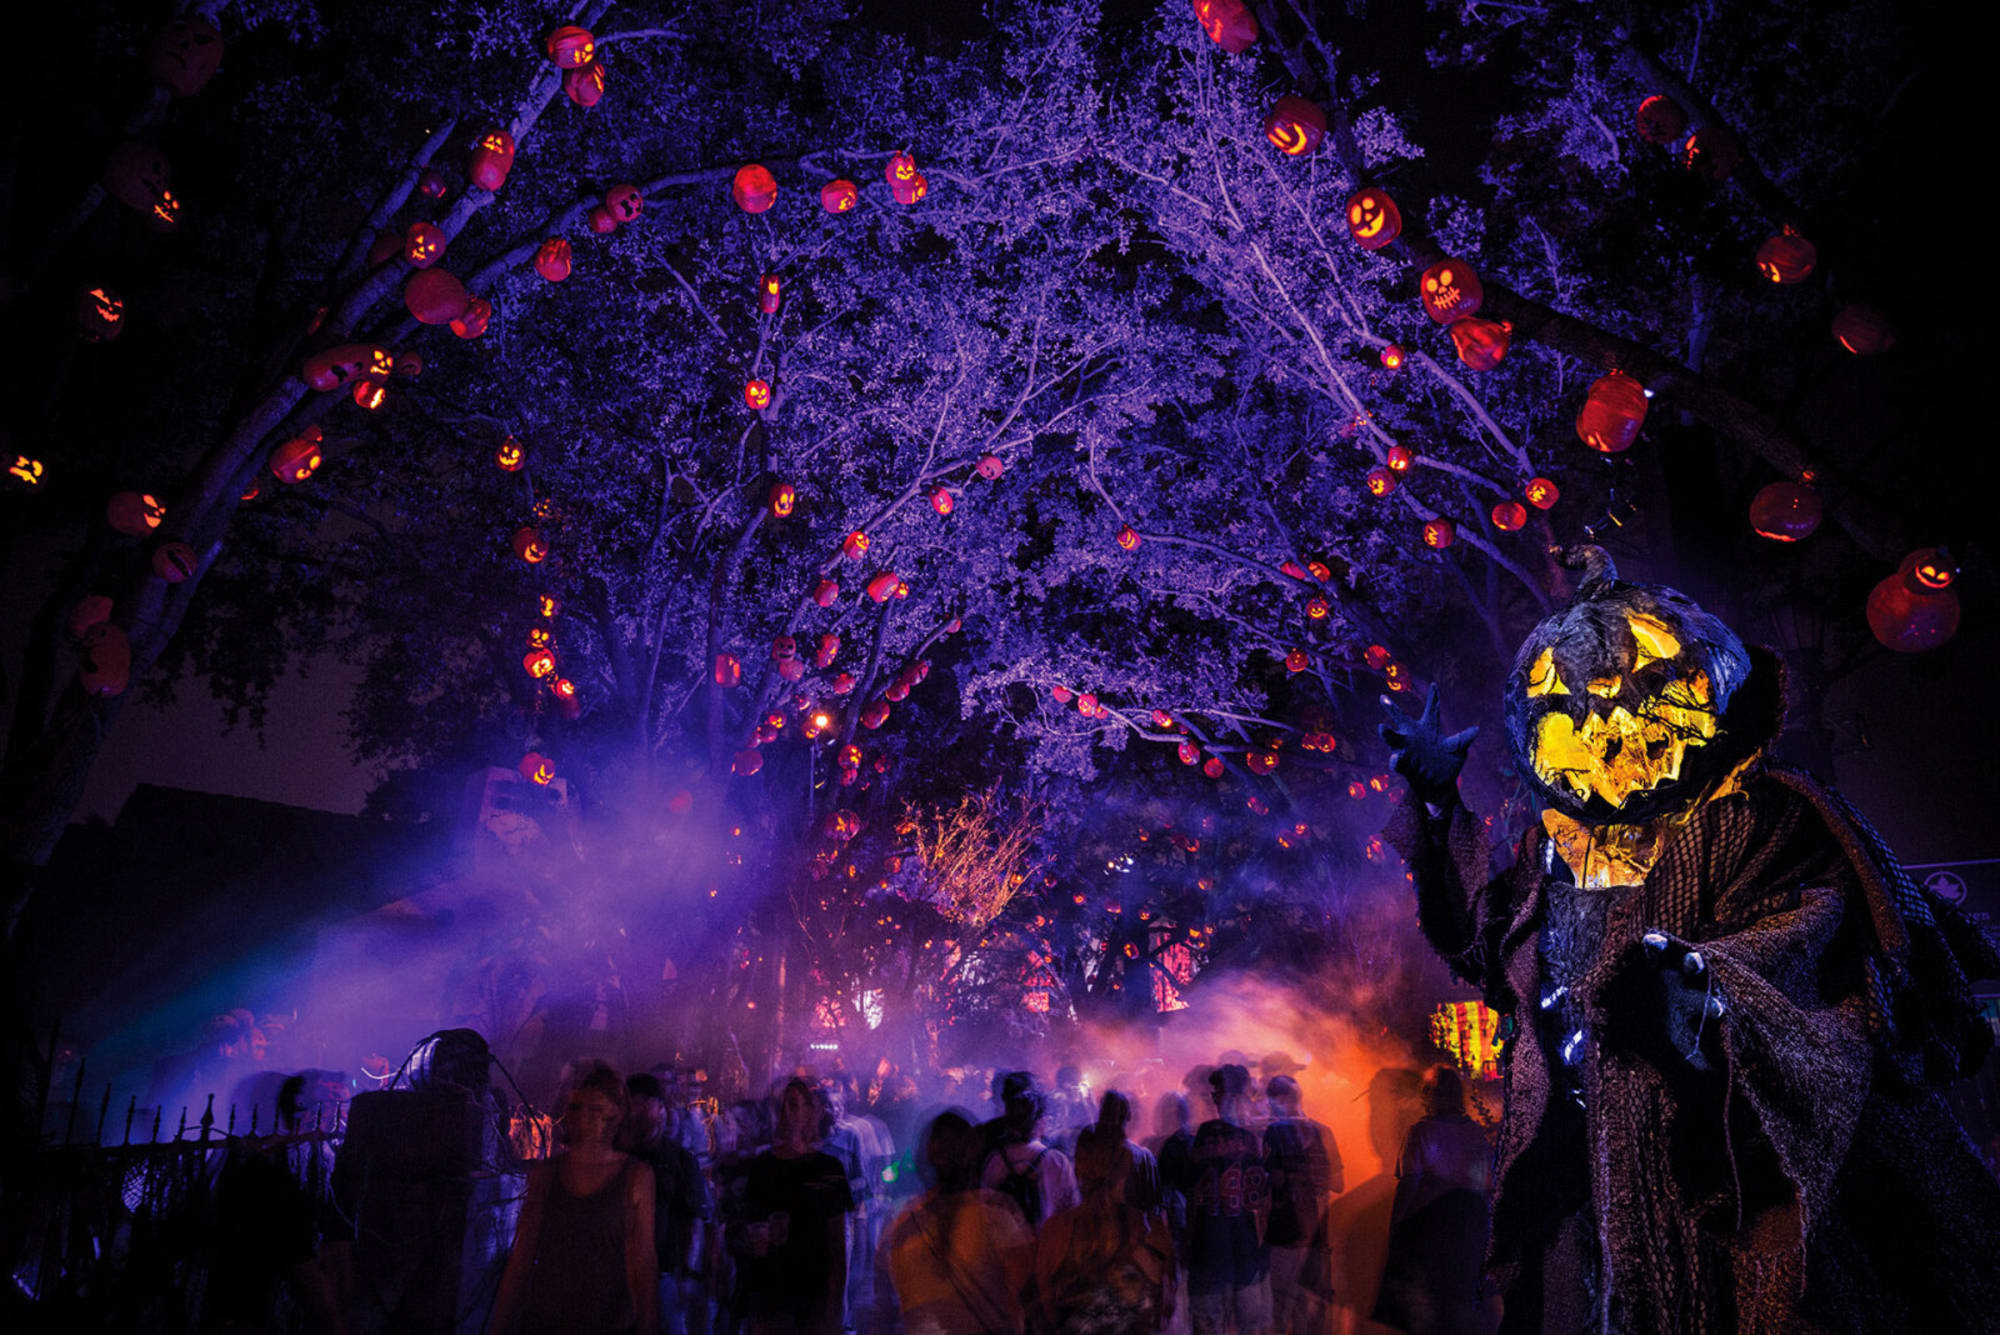 Universal Orlando's Halloween Horror Nights will be off the chain this year